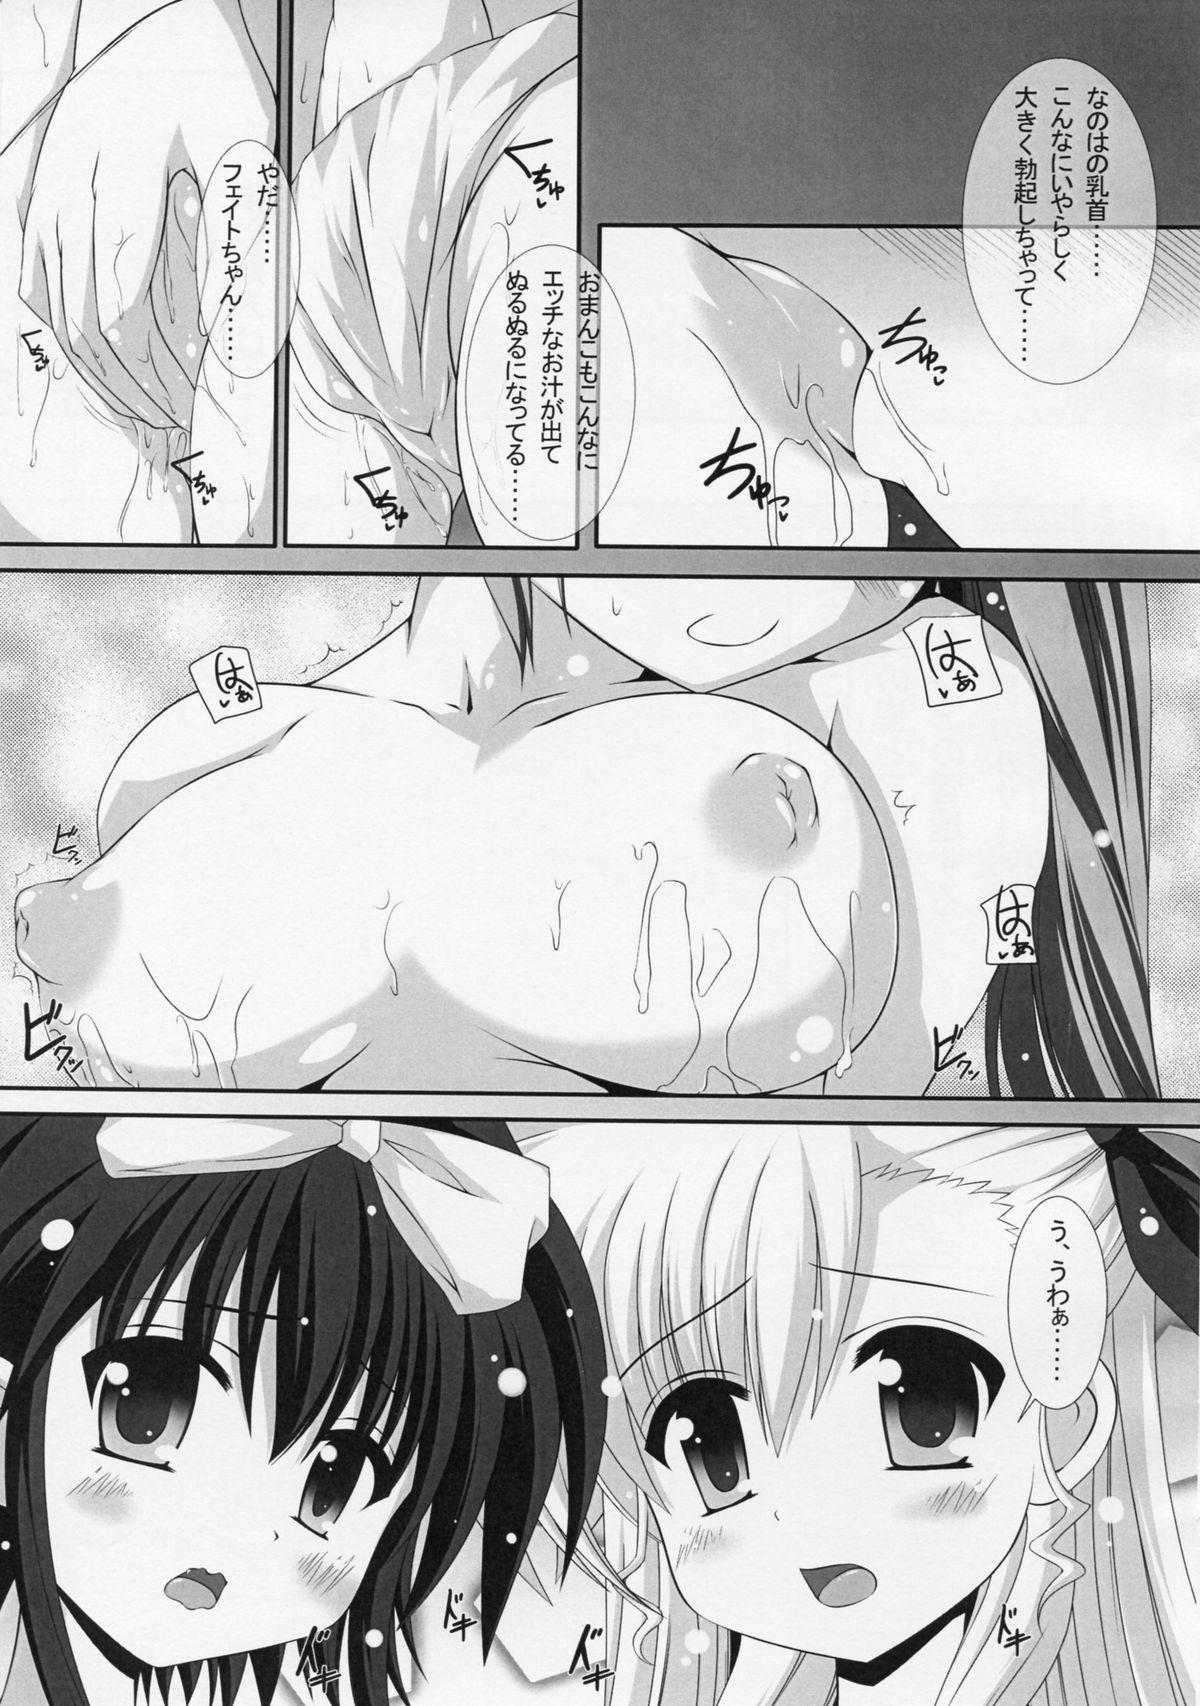 Sexual Drive #02 3